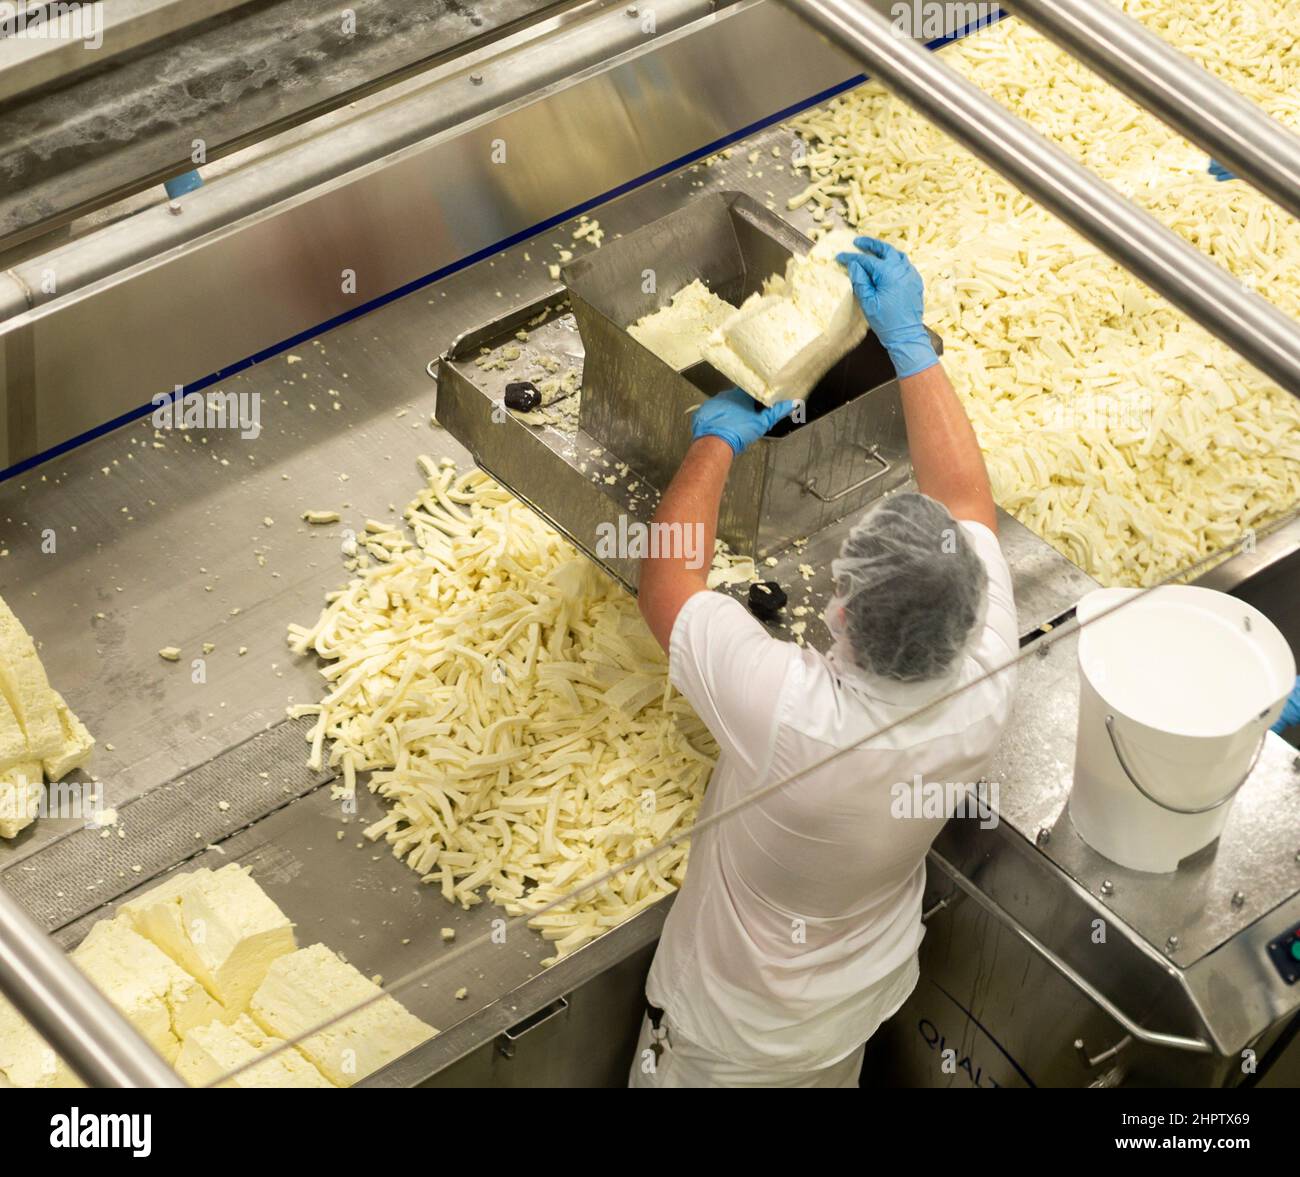 Shredding  the Curd at the St Albert Cheese Coop: A worker hoist large blocks of fresh cheese into a cutter to shred them into curd curls at the Coop cheese factory. Stock Photo